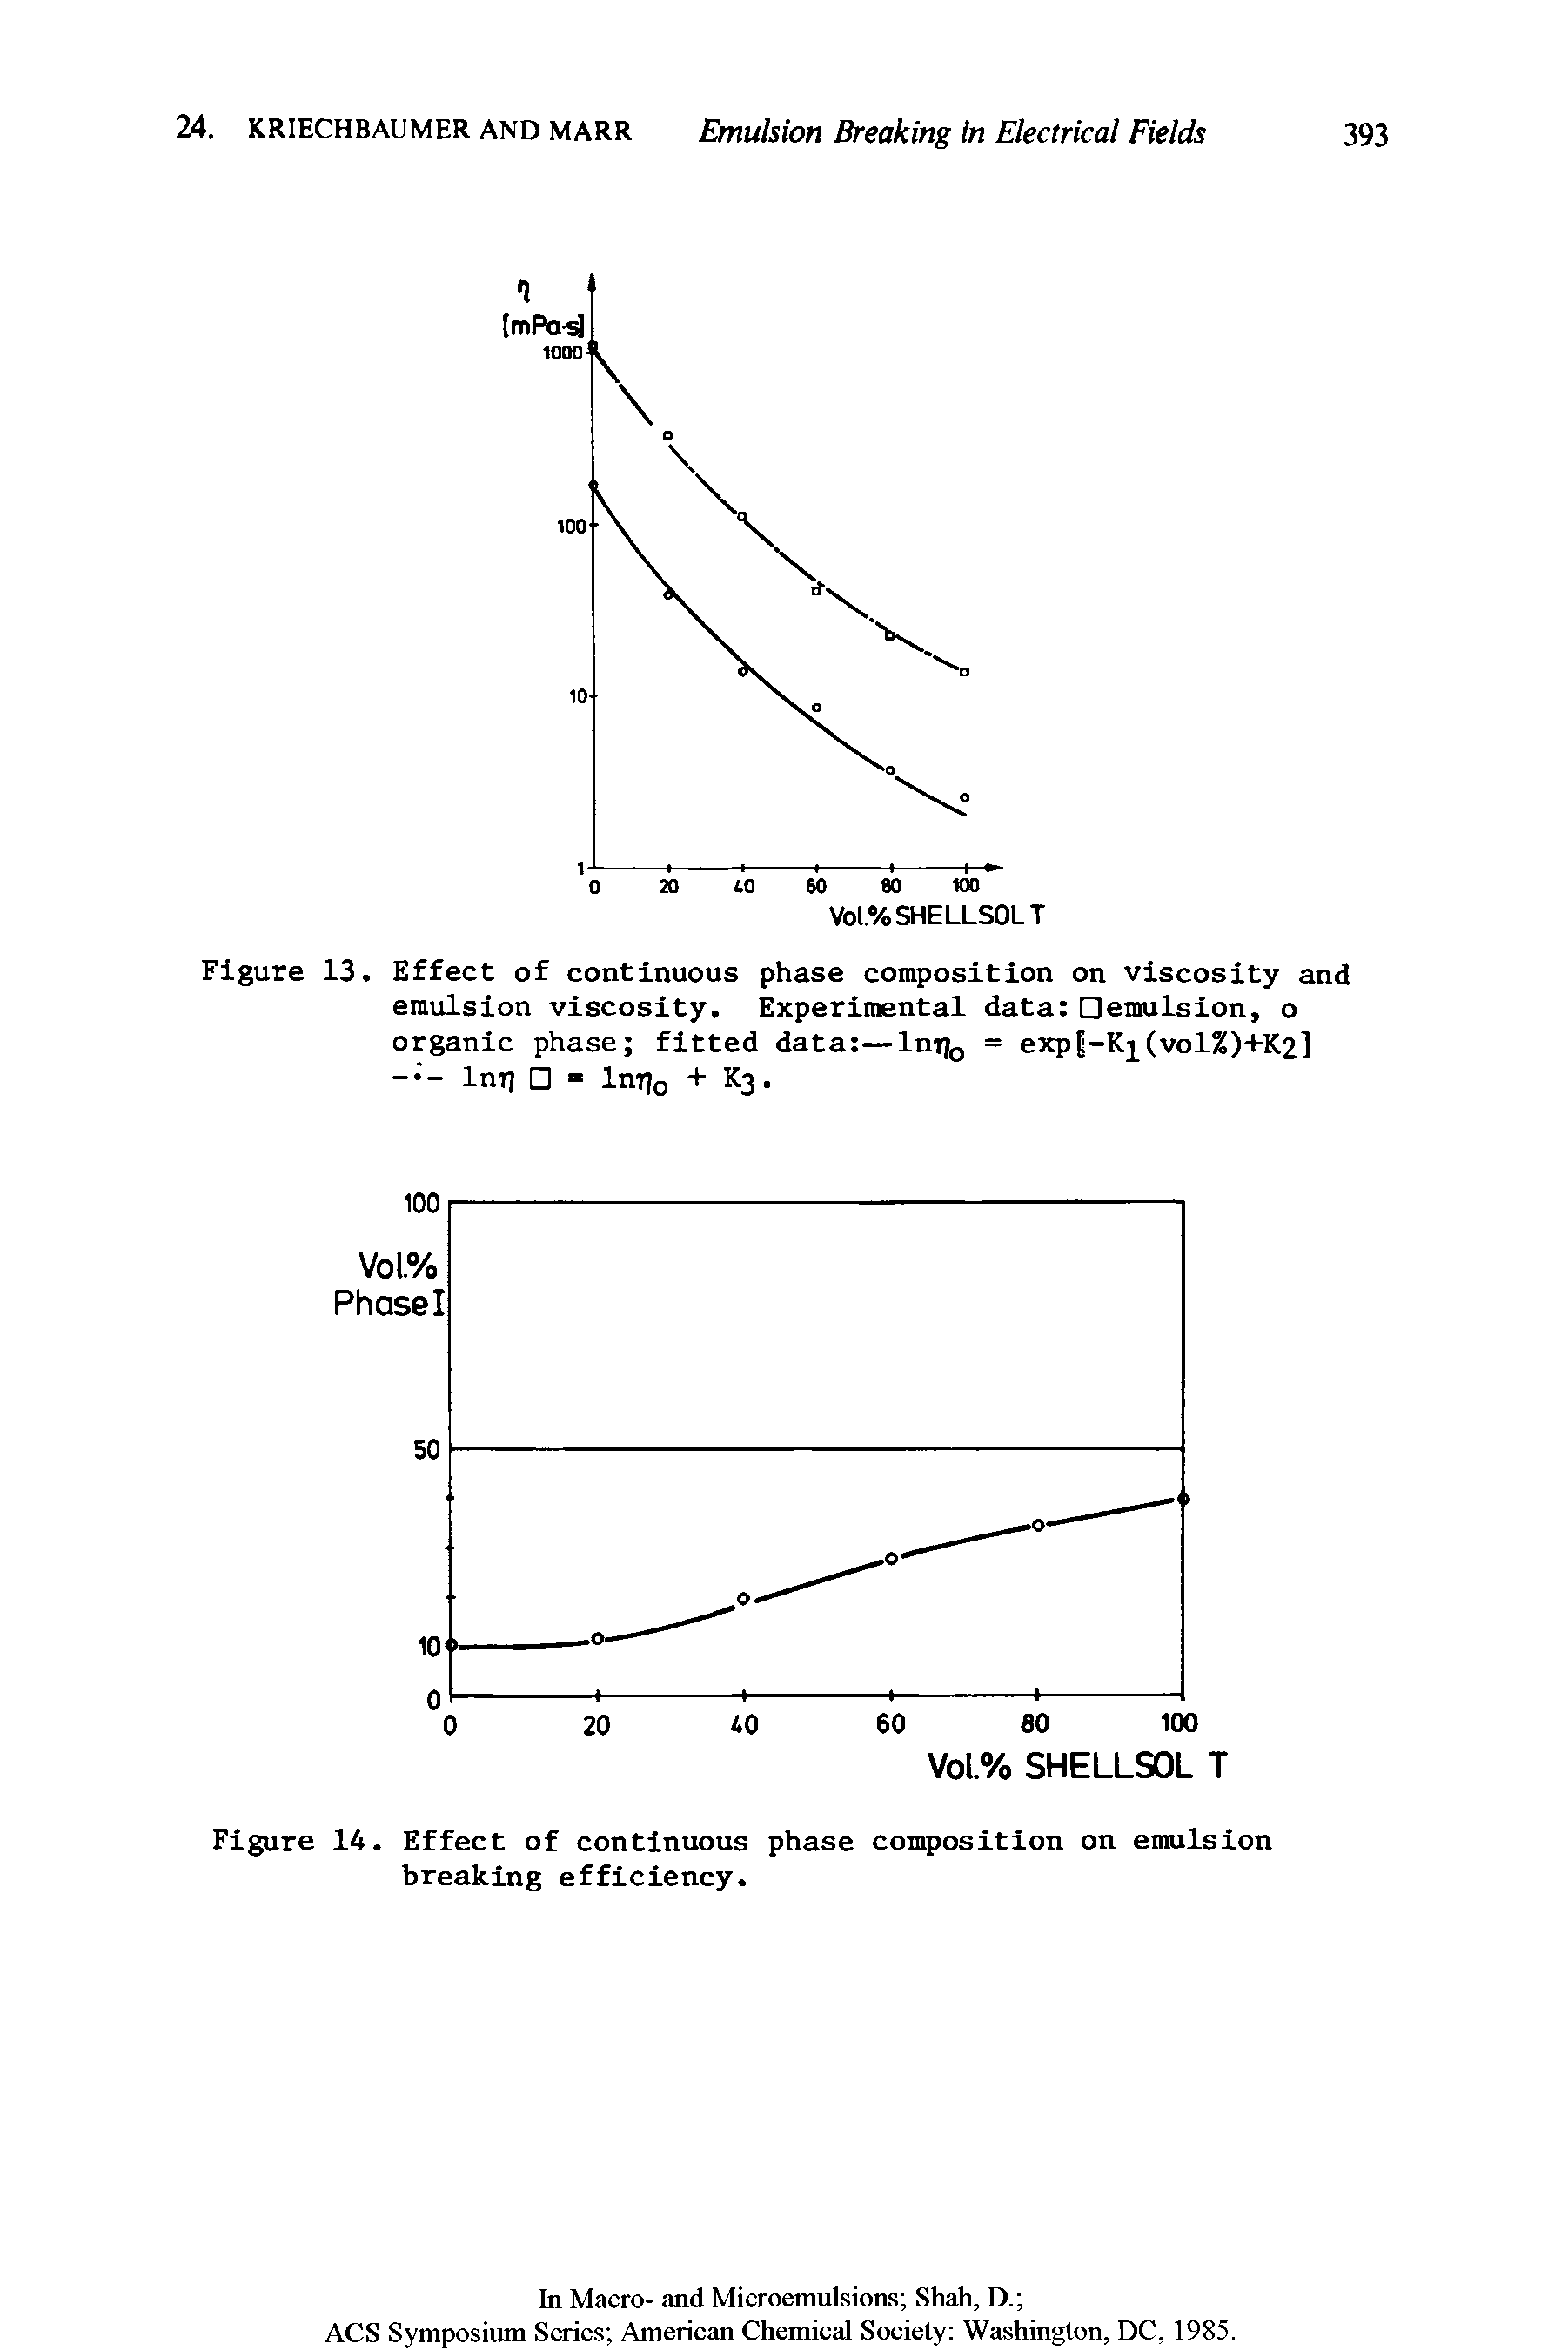 Figure 14. Effect of continuous phase composition on emulsion breaking efficiency.